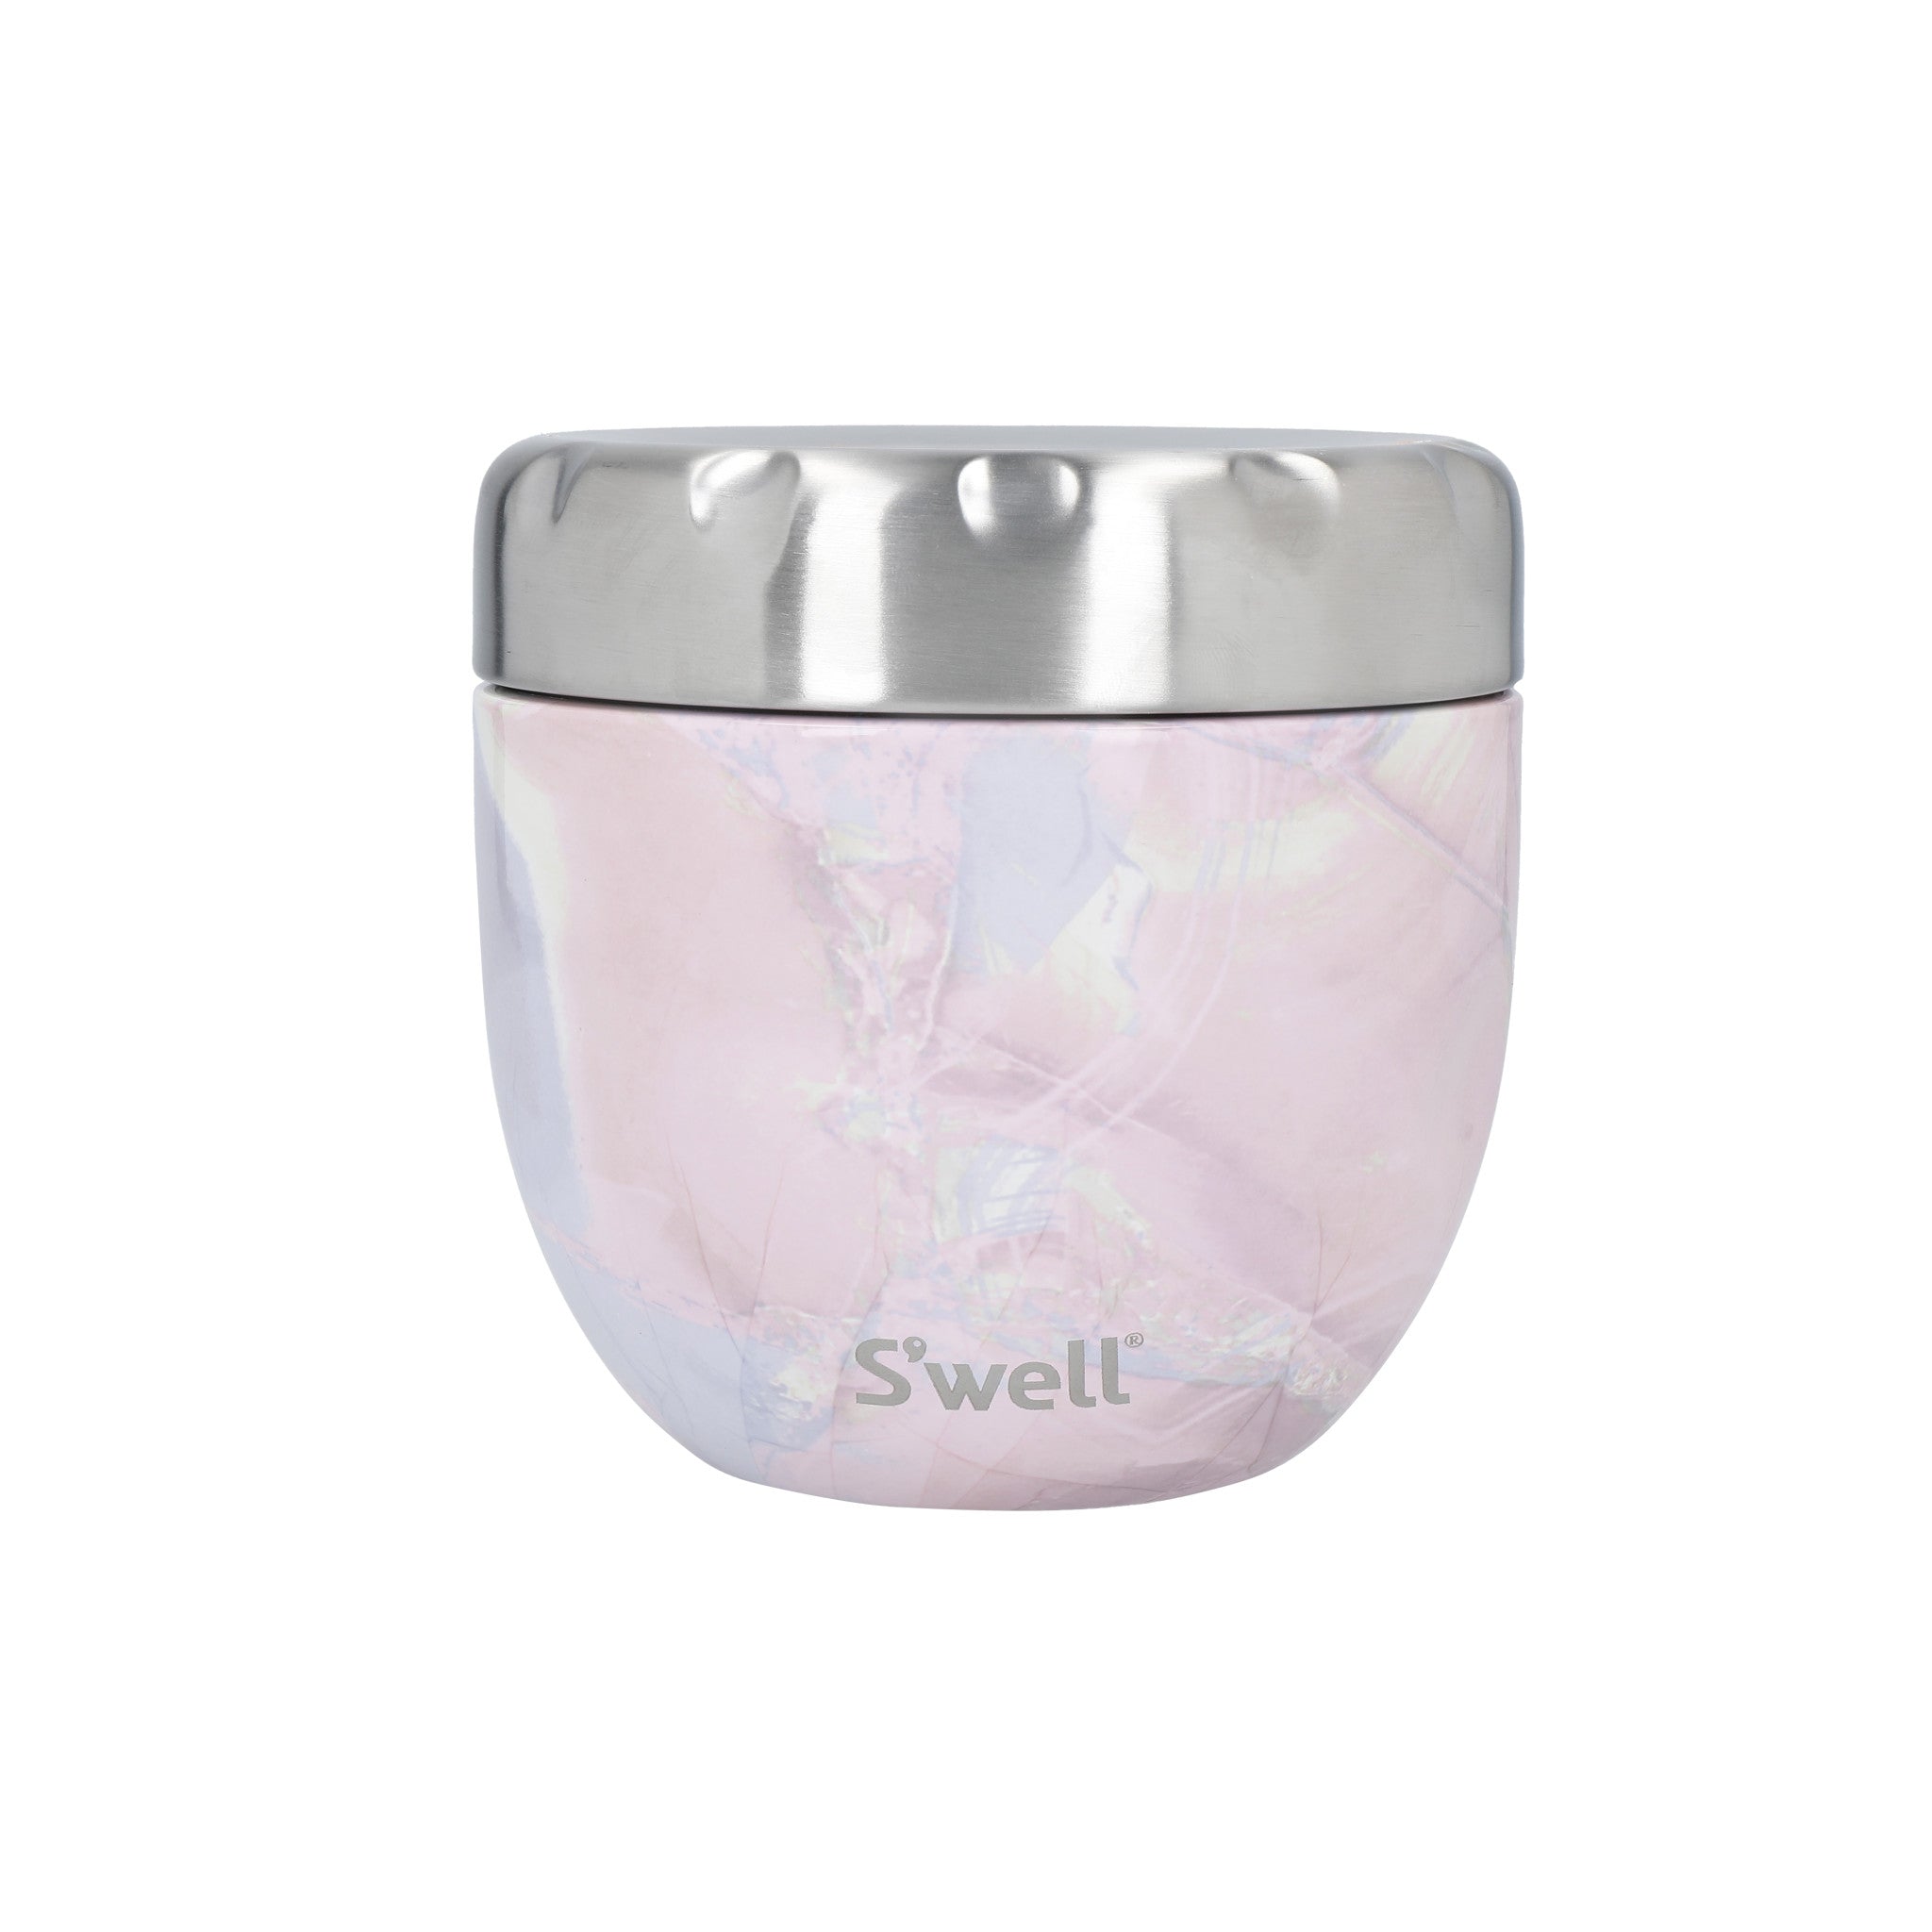 Geode Rose S'well Eats 2-in-1 Food Bowl, 636ml – CookServeEnjoy